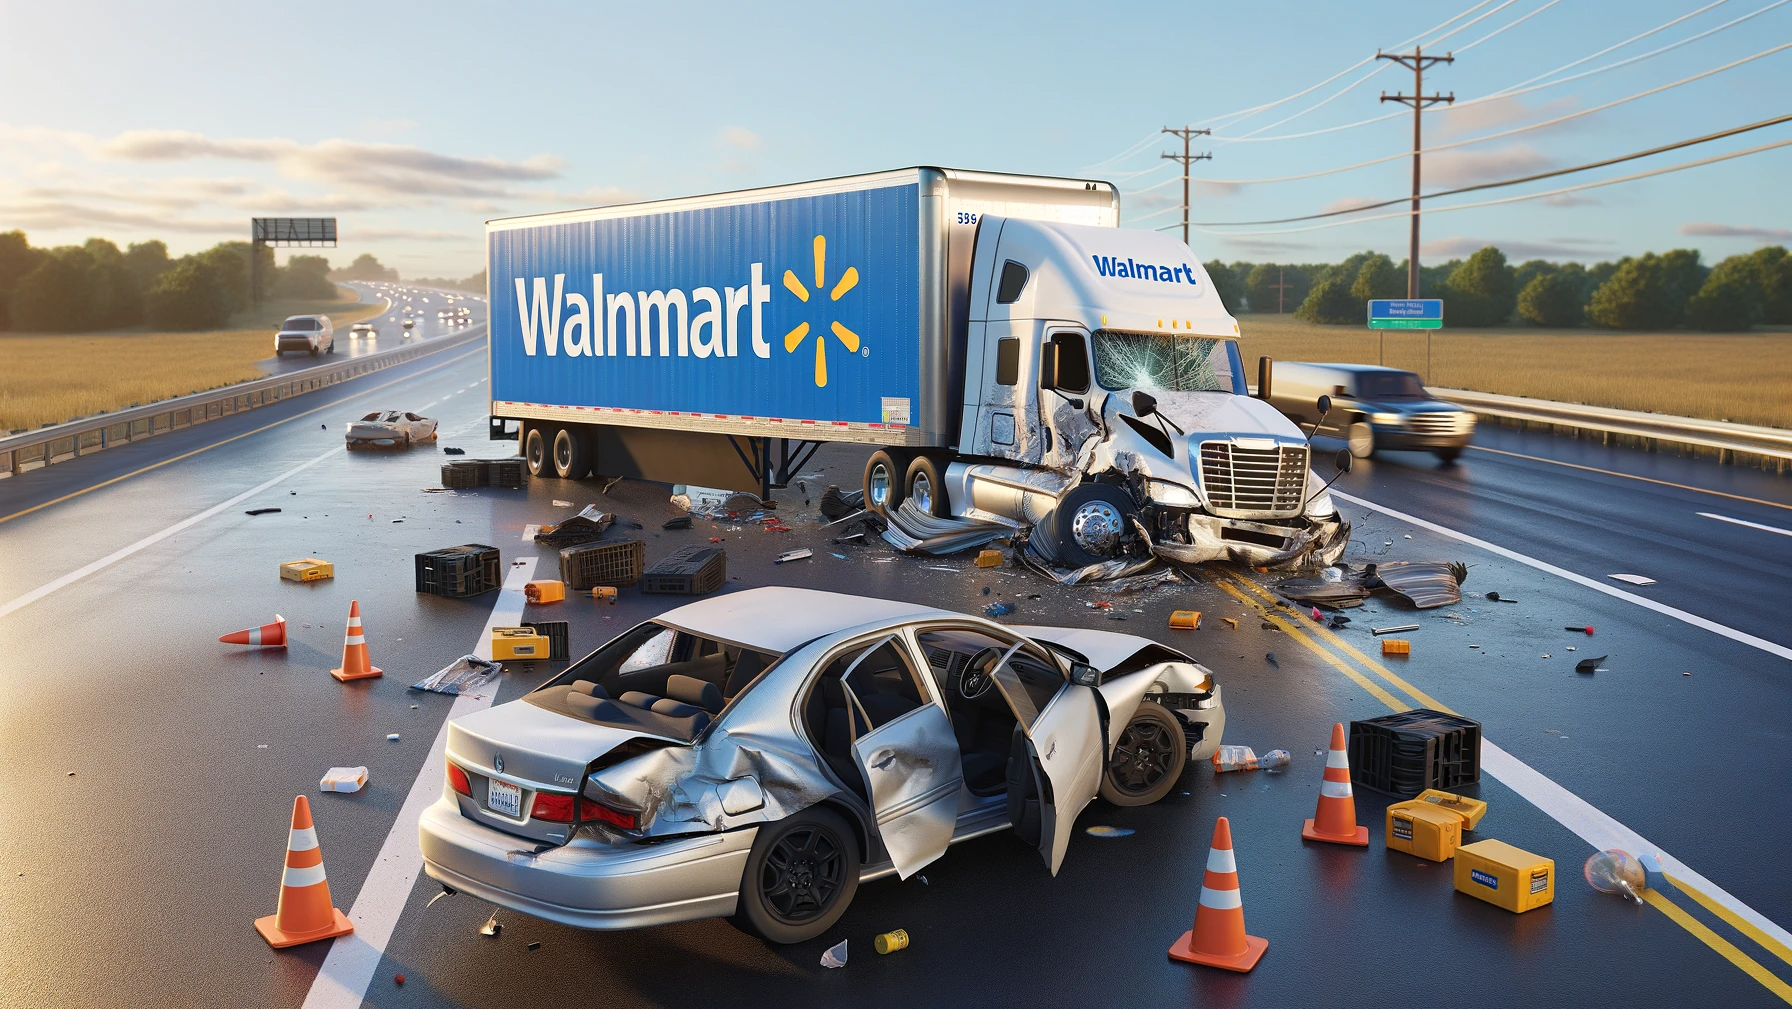 Walmart 18 wheeler accident with car on highway in texas.